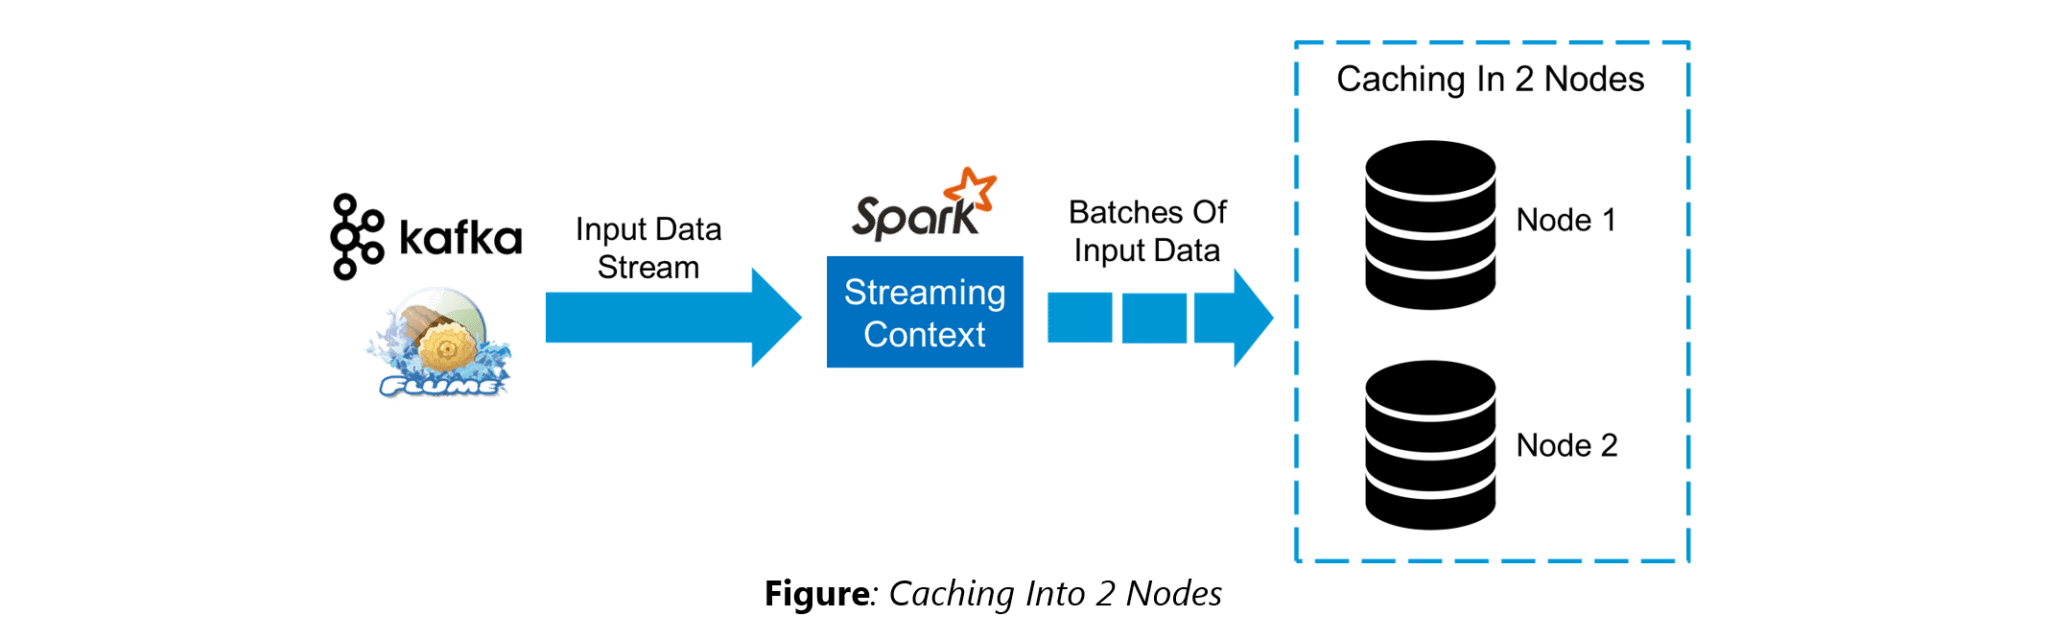 Caching-Spark-Interview-Questions-Edureka-1.png